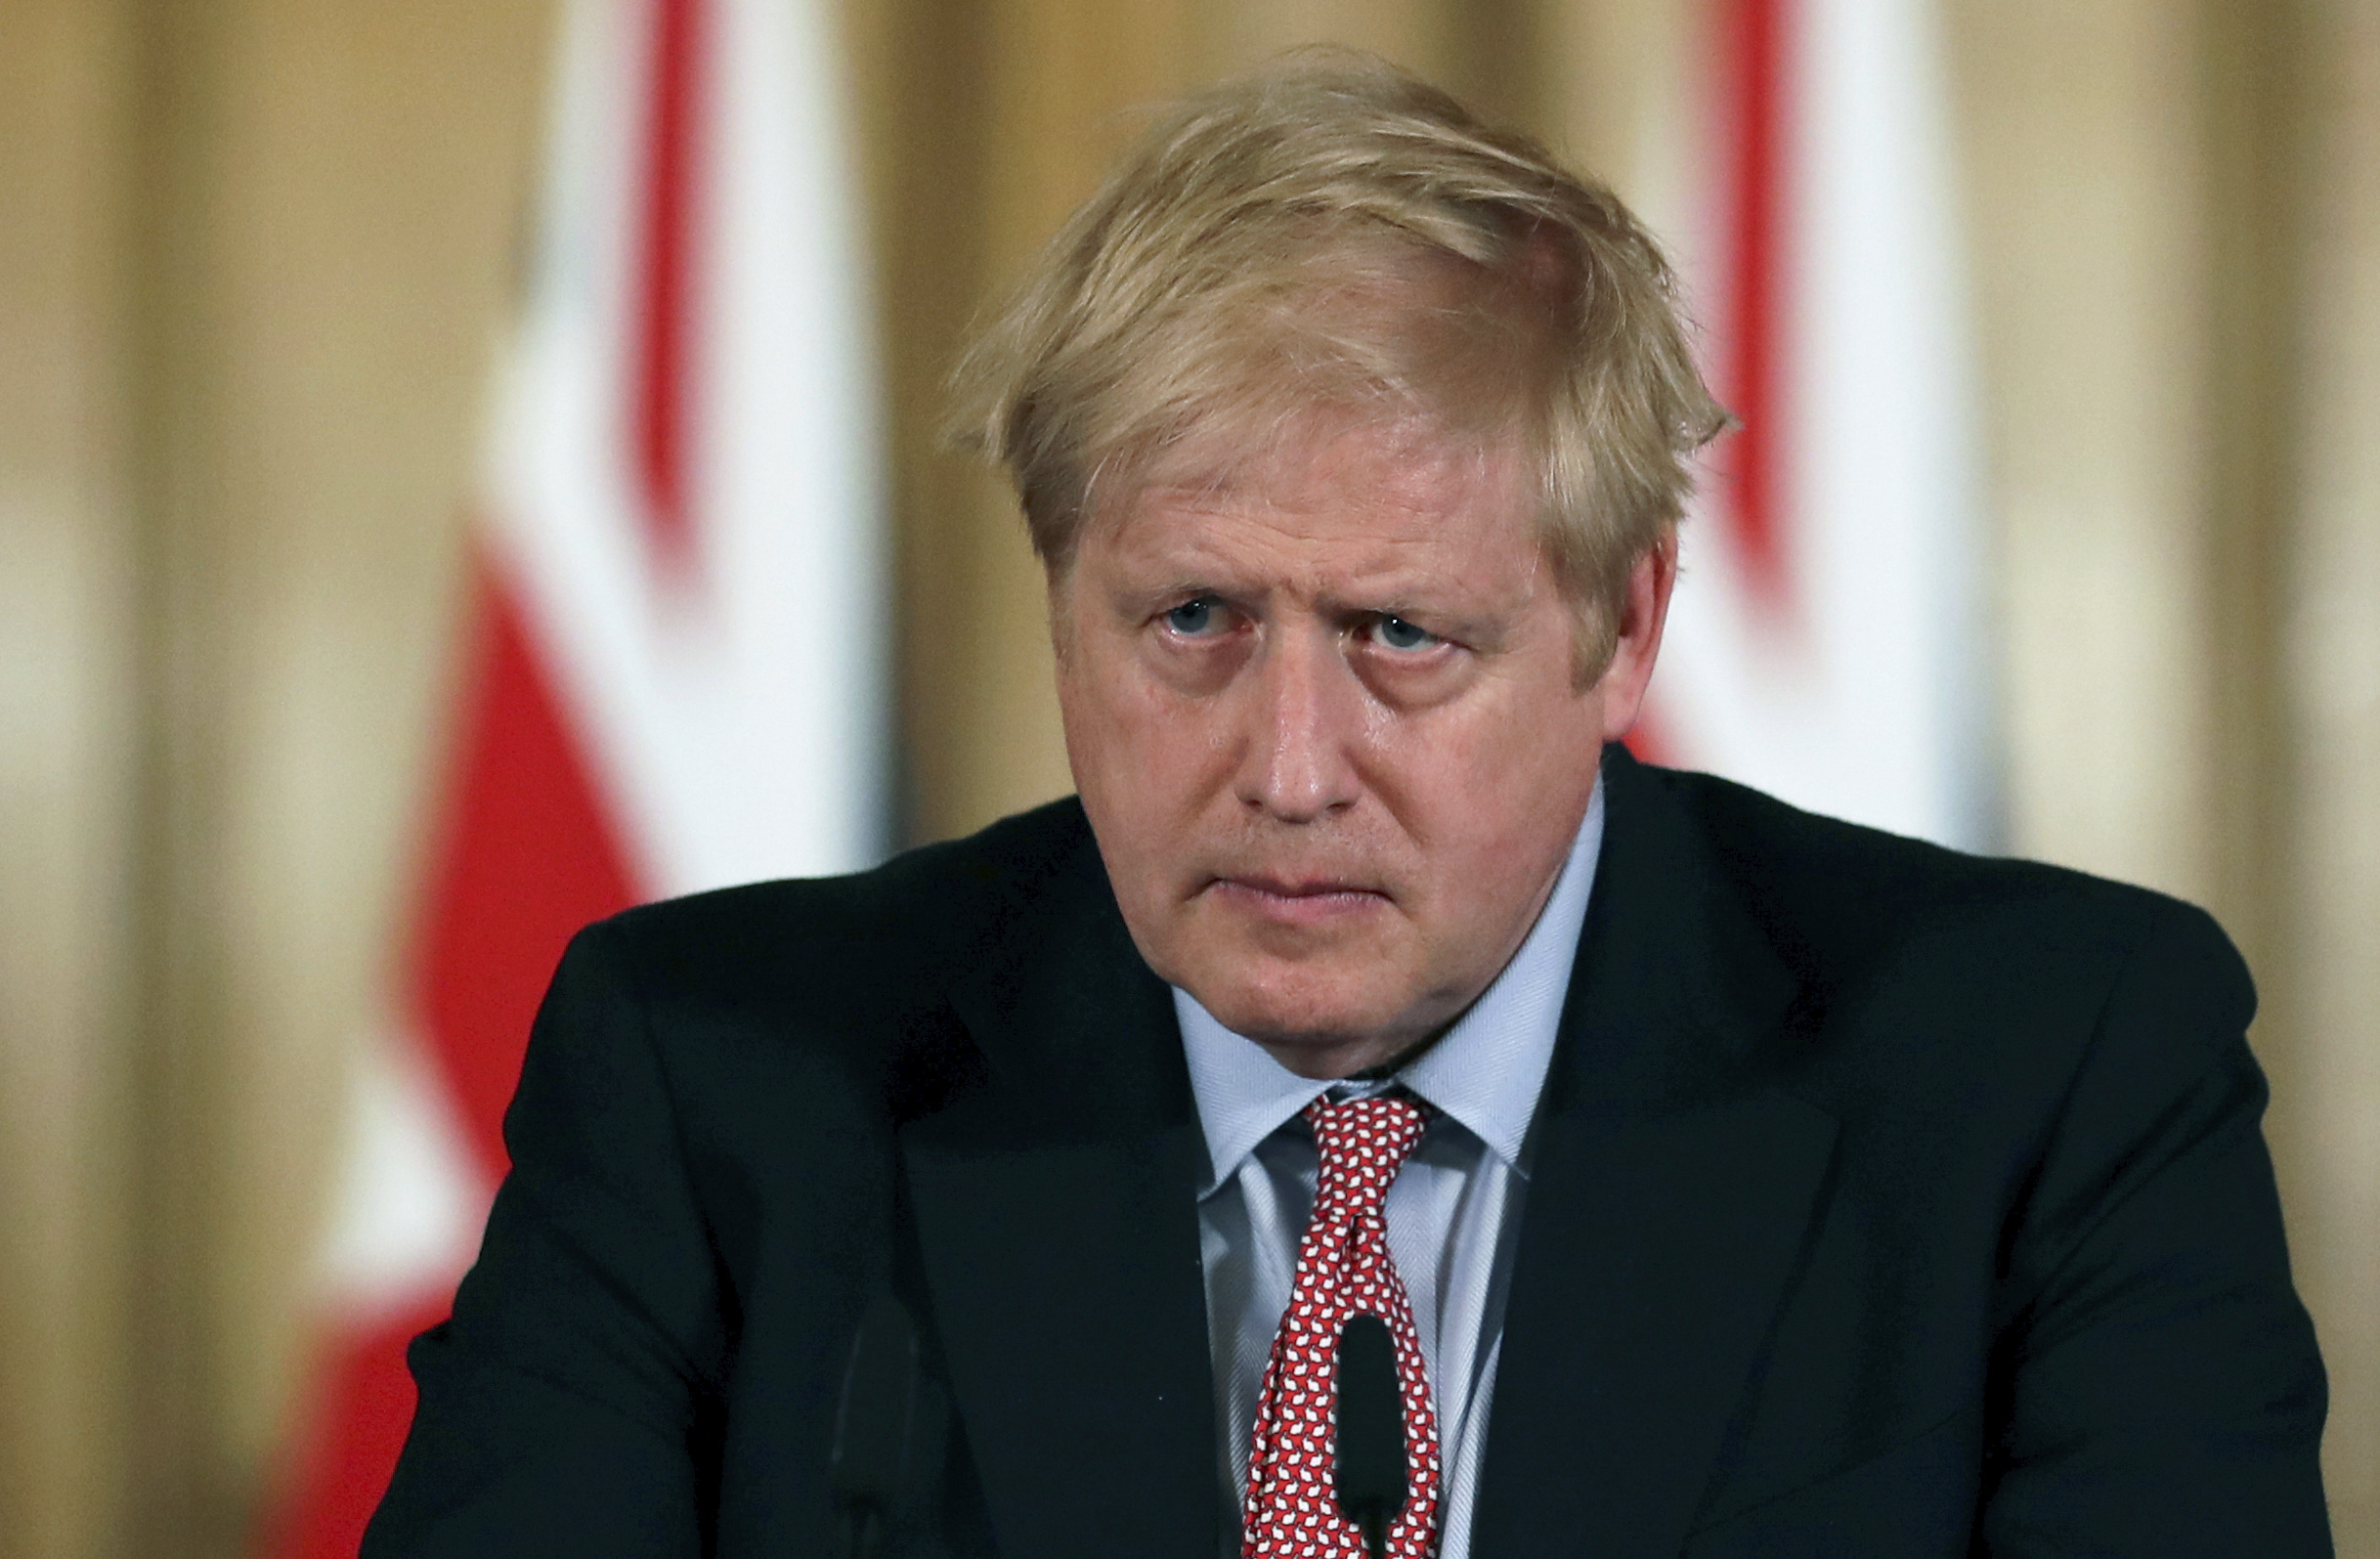 Britain's Prime Minister Boris Johnson holds a news conference to give the government's response to the new Covid-19 coronavirus outbreak, at Downing Street in London.